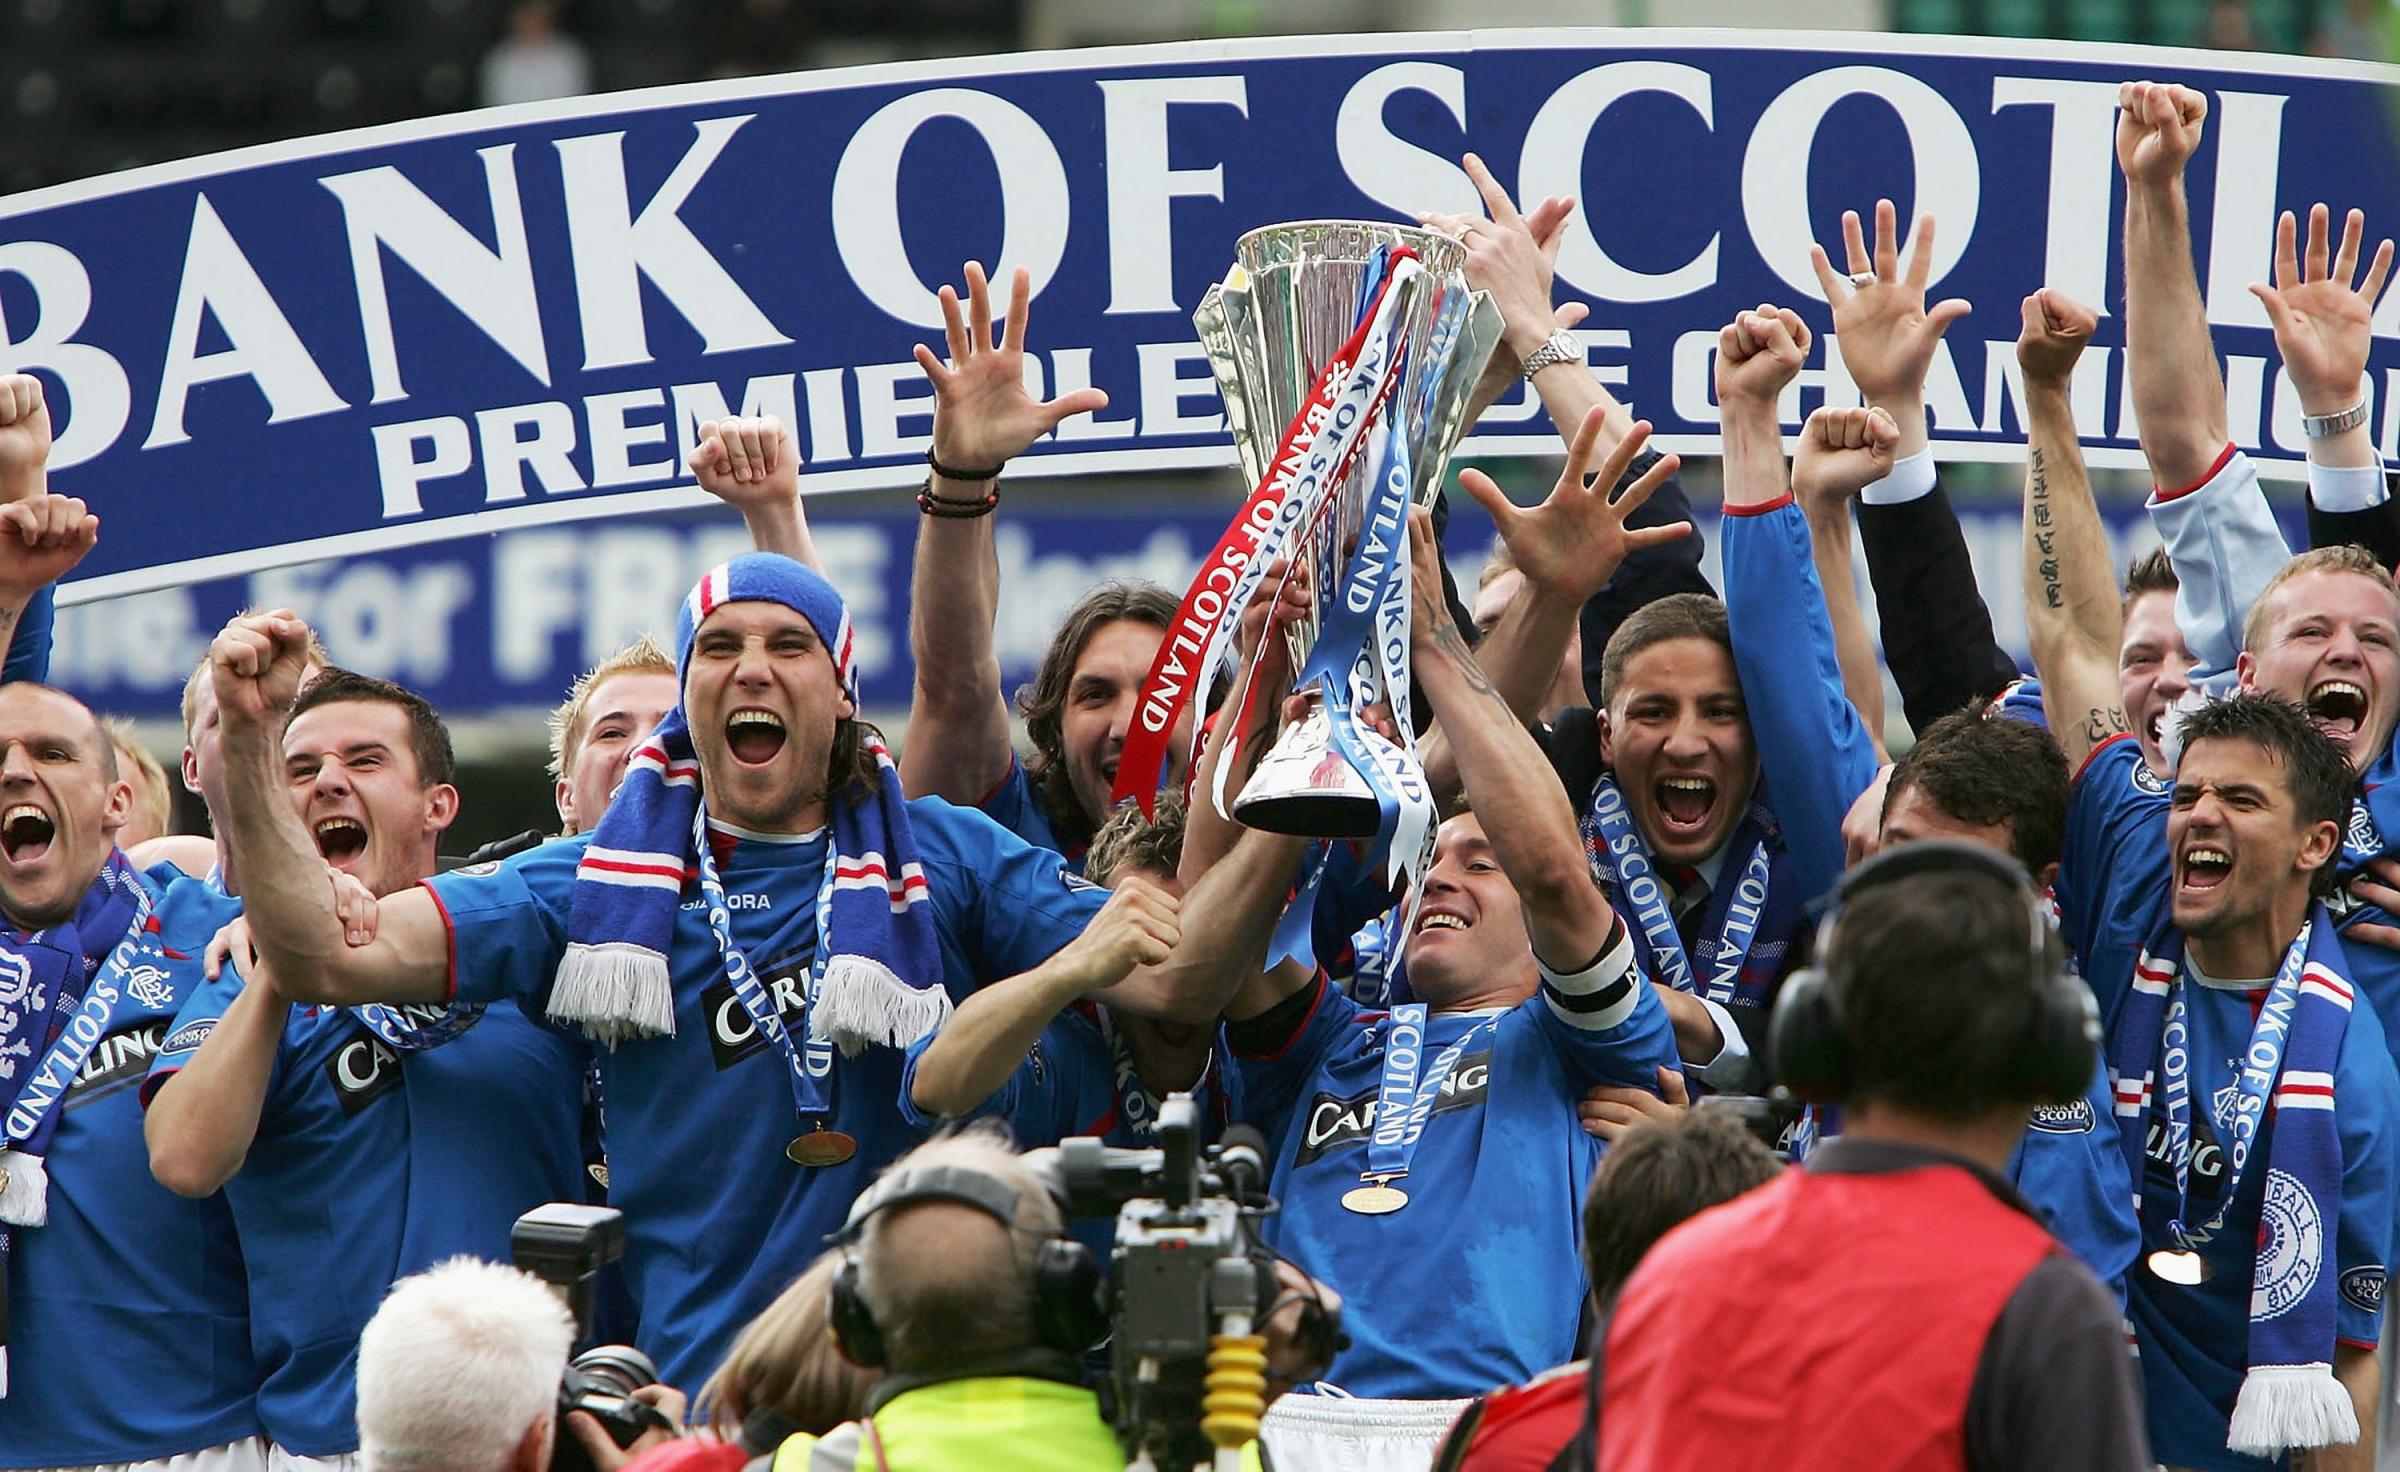 Rangers won the title on Helicopter Sunday